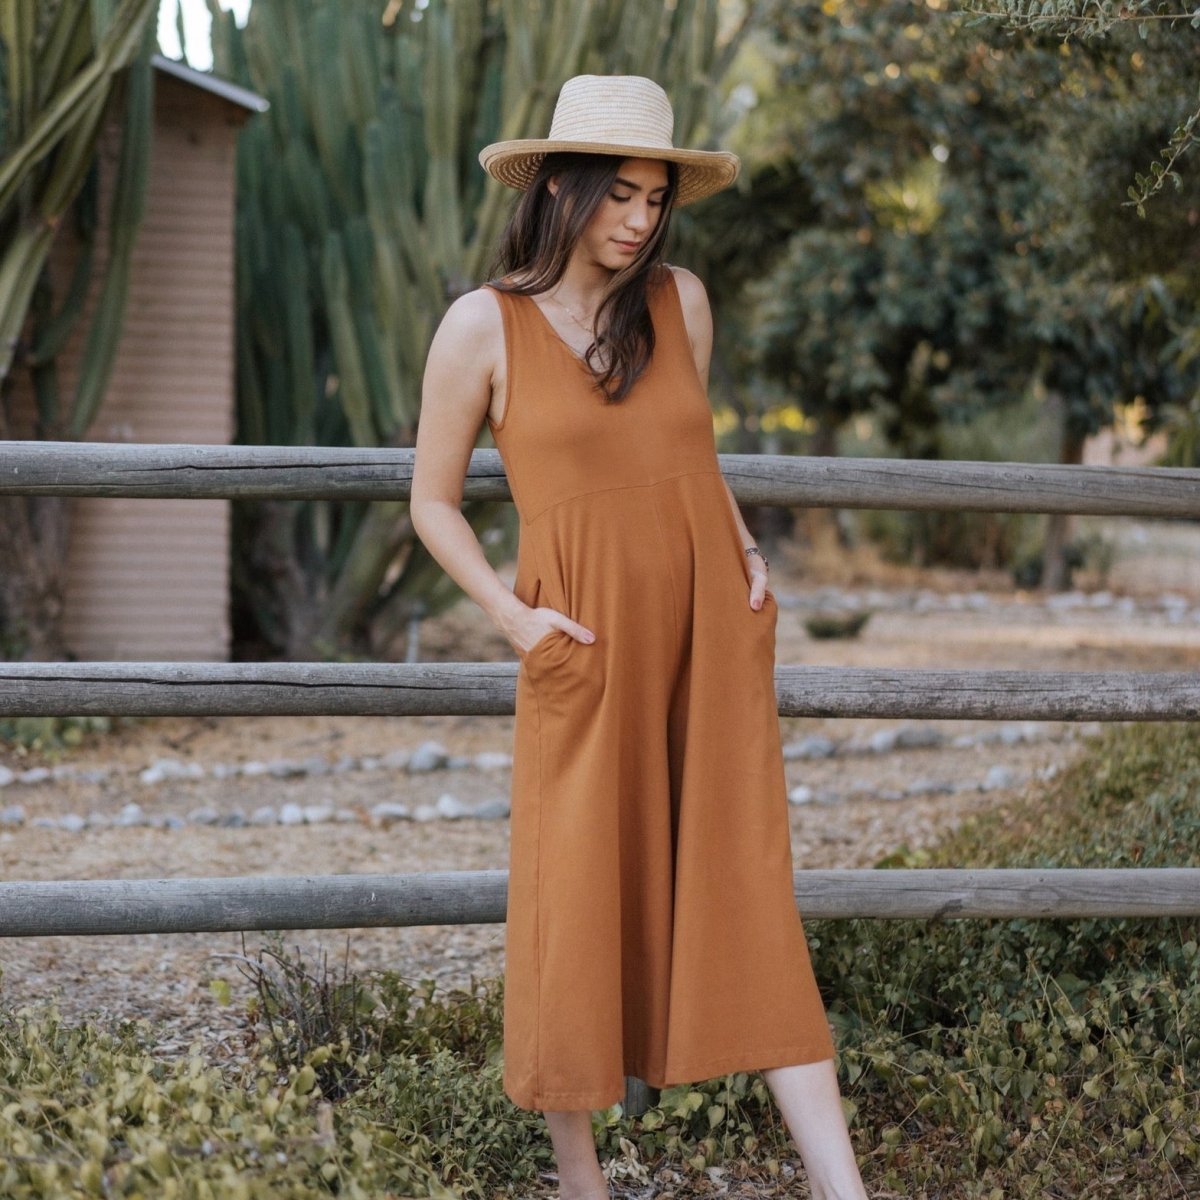 Relaxed sleeveless midi-length jumpsuit with pockets in the color Saddle Brown. The Lakeside Jumpsuit is designed by Mien and made in Los Angeles, CA.